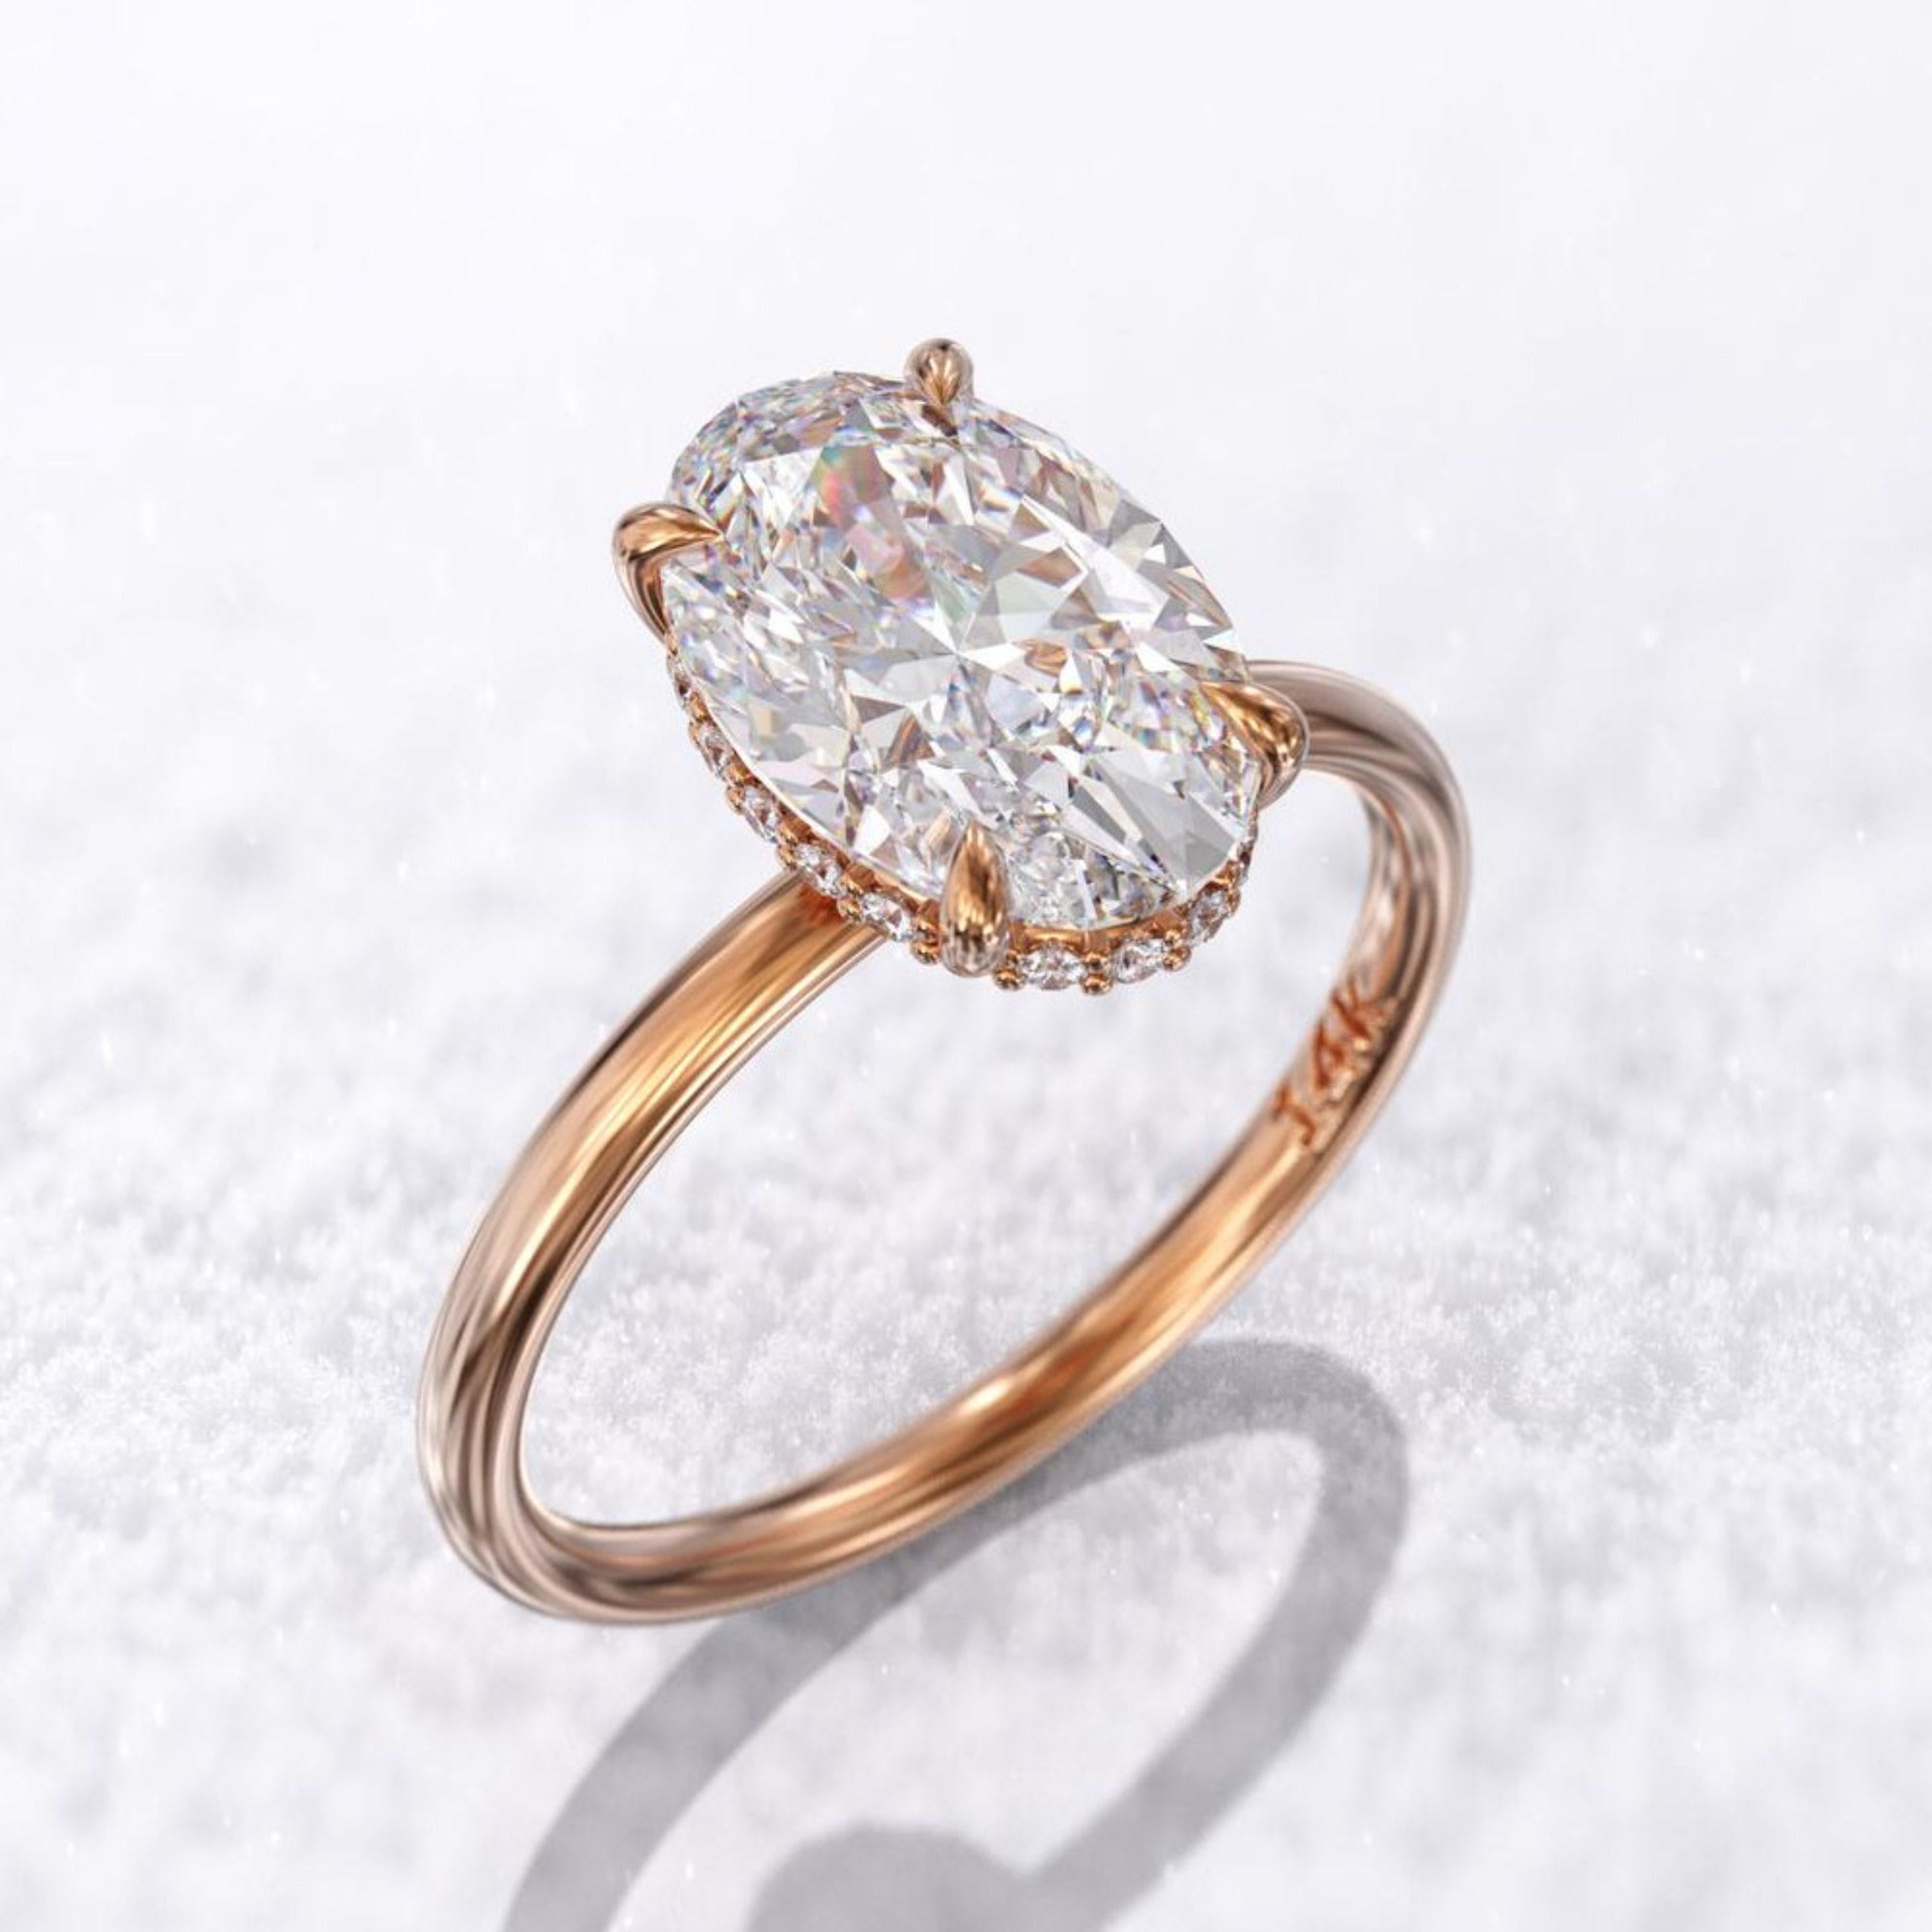 For Sale:  Certified 3 CT Natural Diamond Engagement Ring in 18K Gold, Cocktail Ring 3